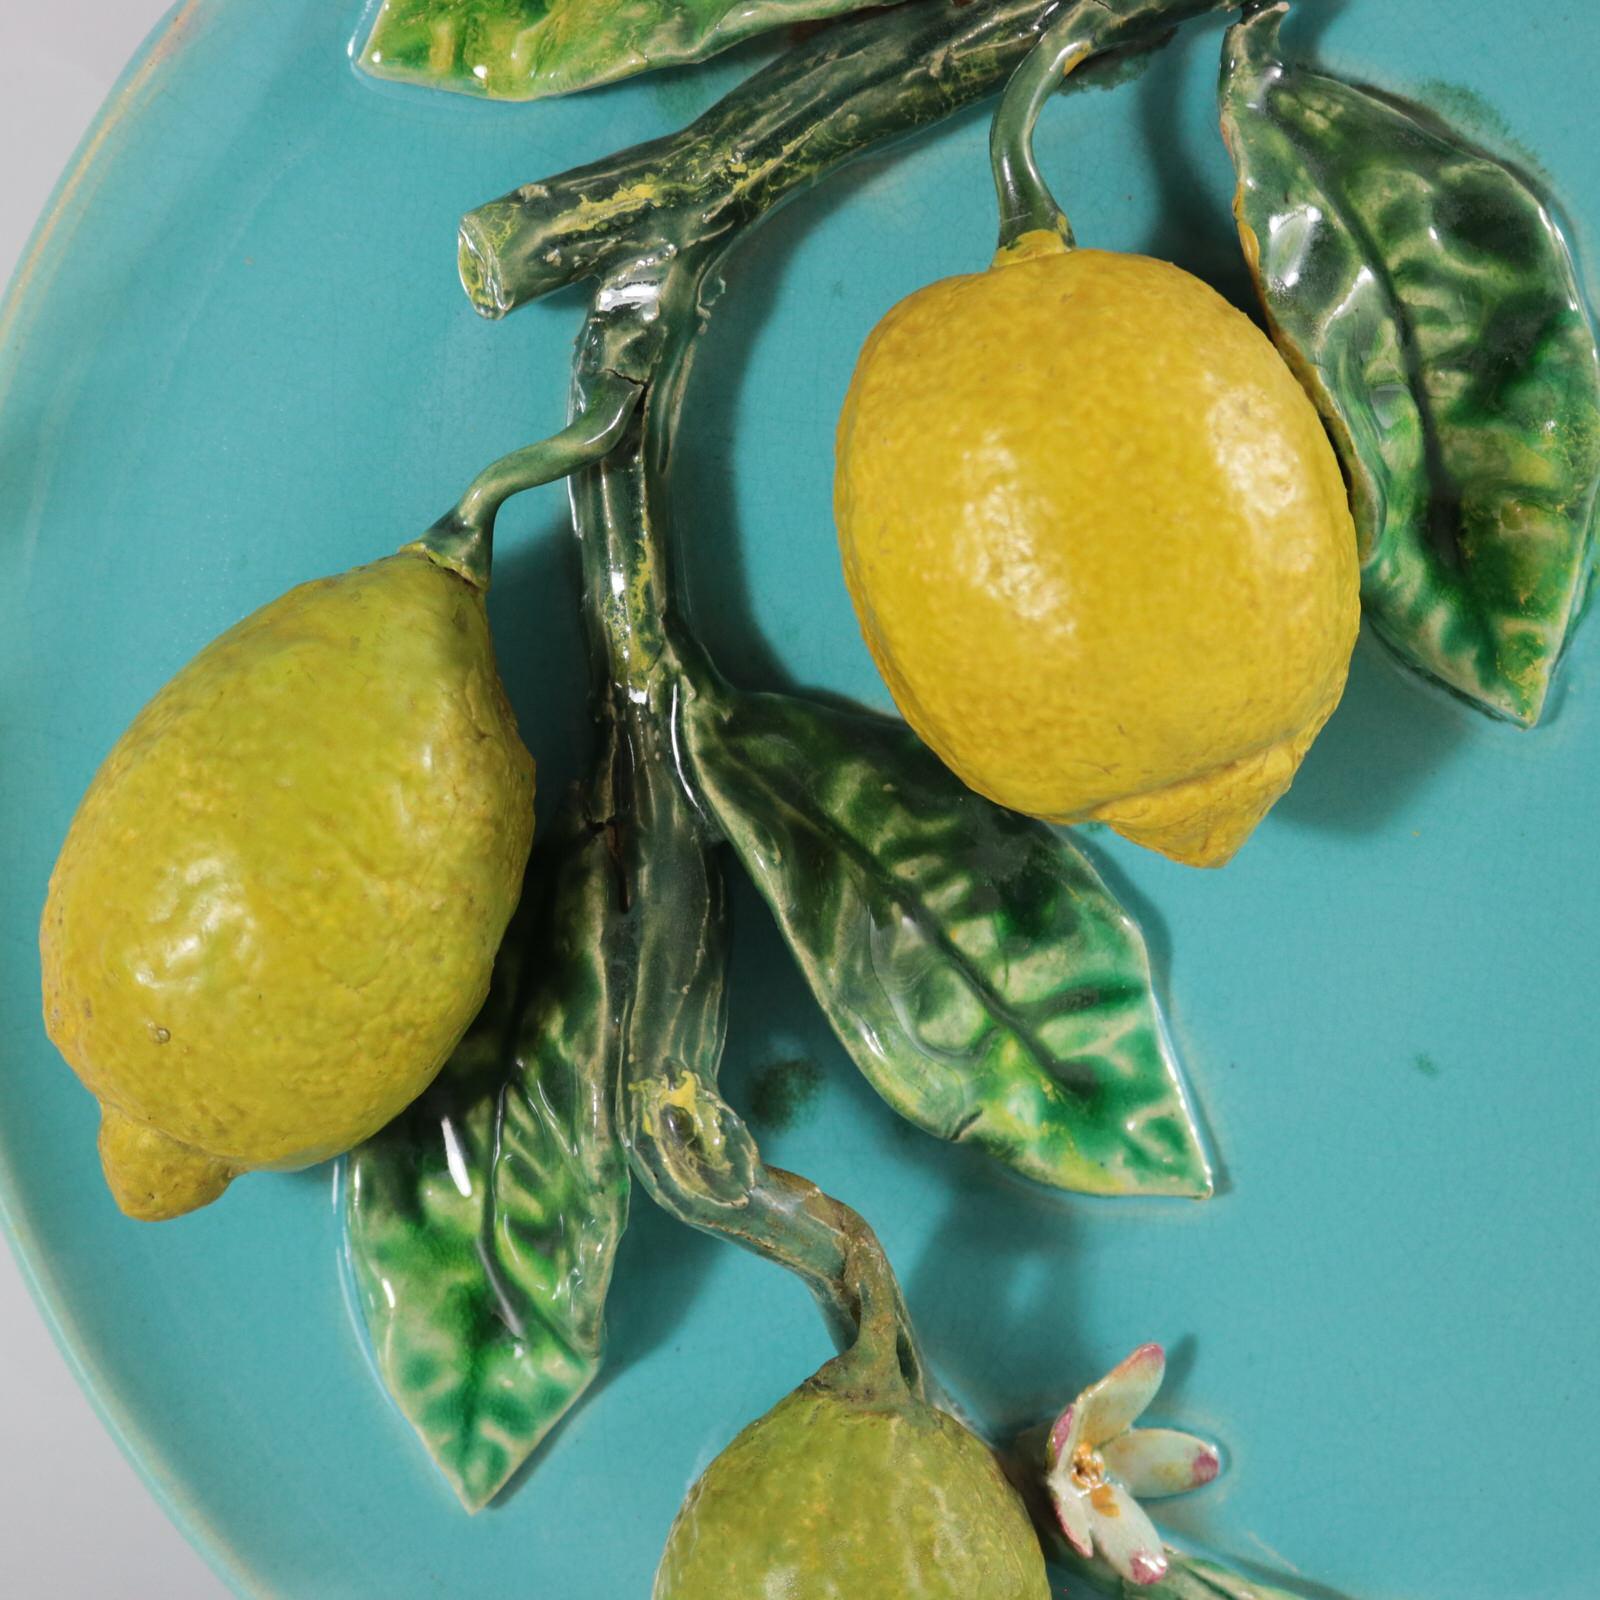 Menton French Majolica wall plate which features lemons, leaves and flowers. Colouration: turquoise, green, yellow, are predominant.